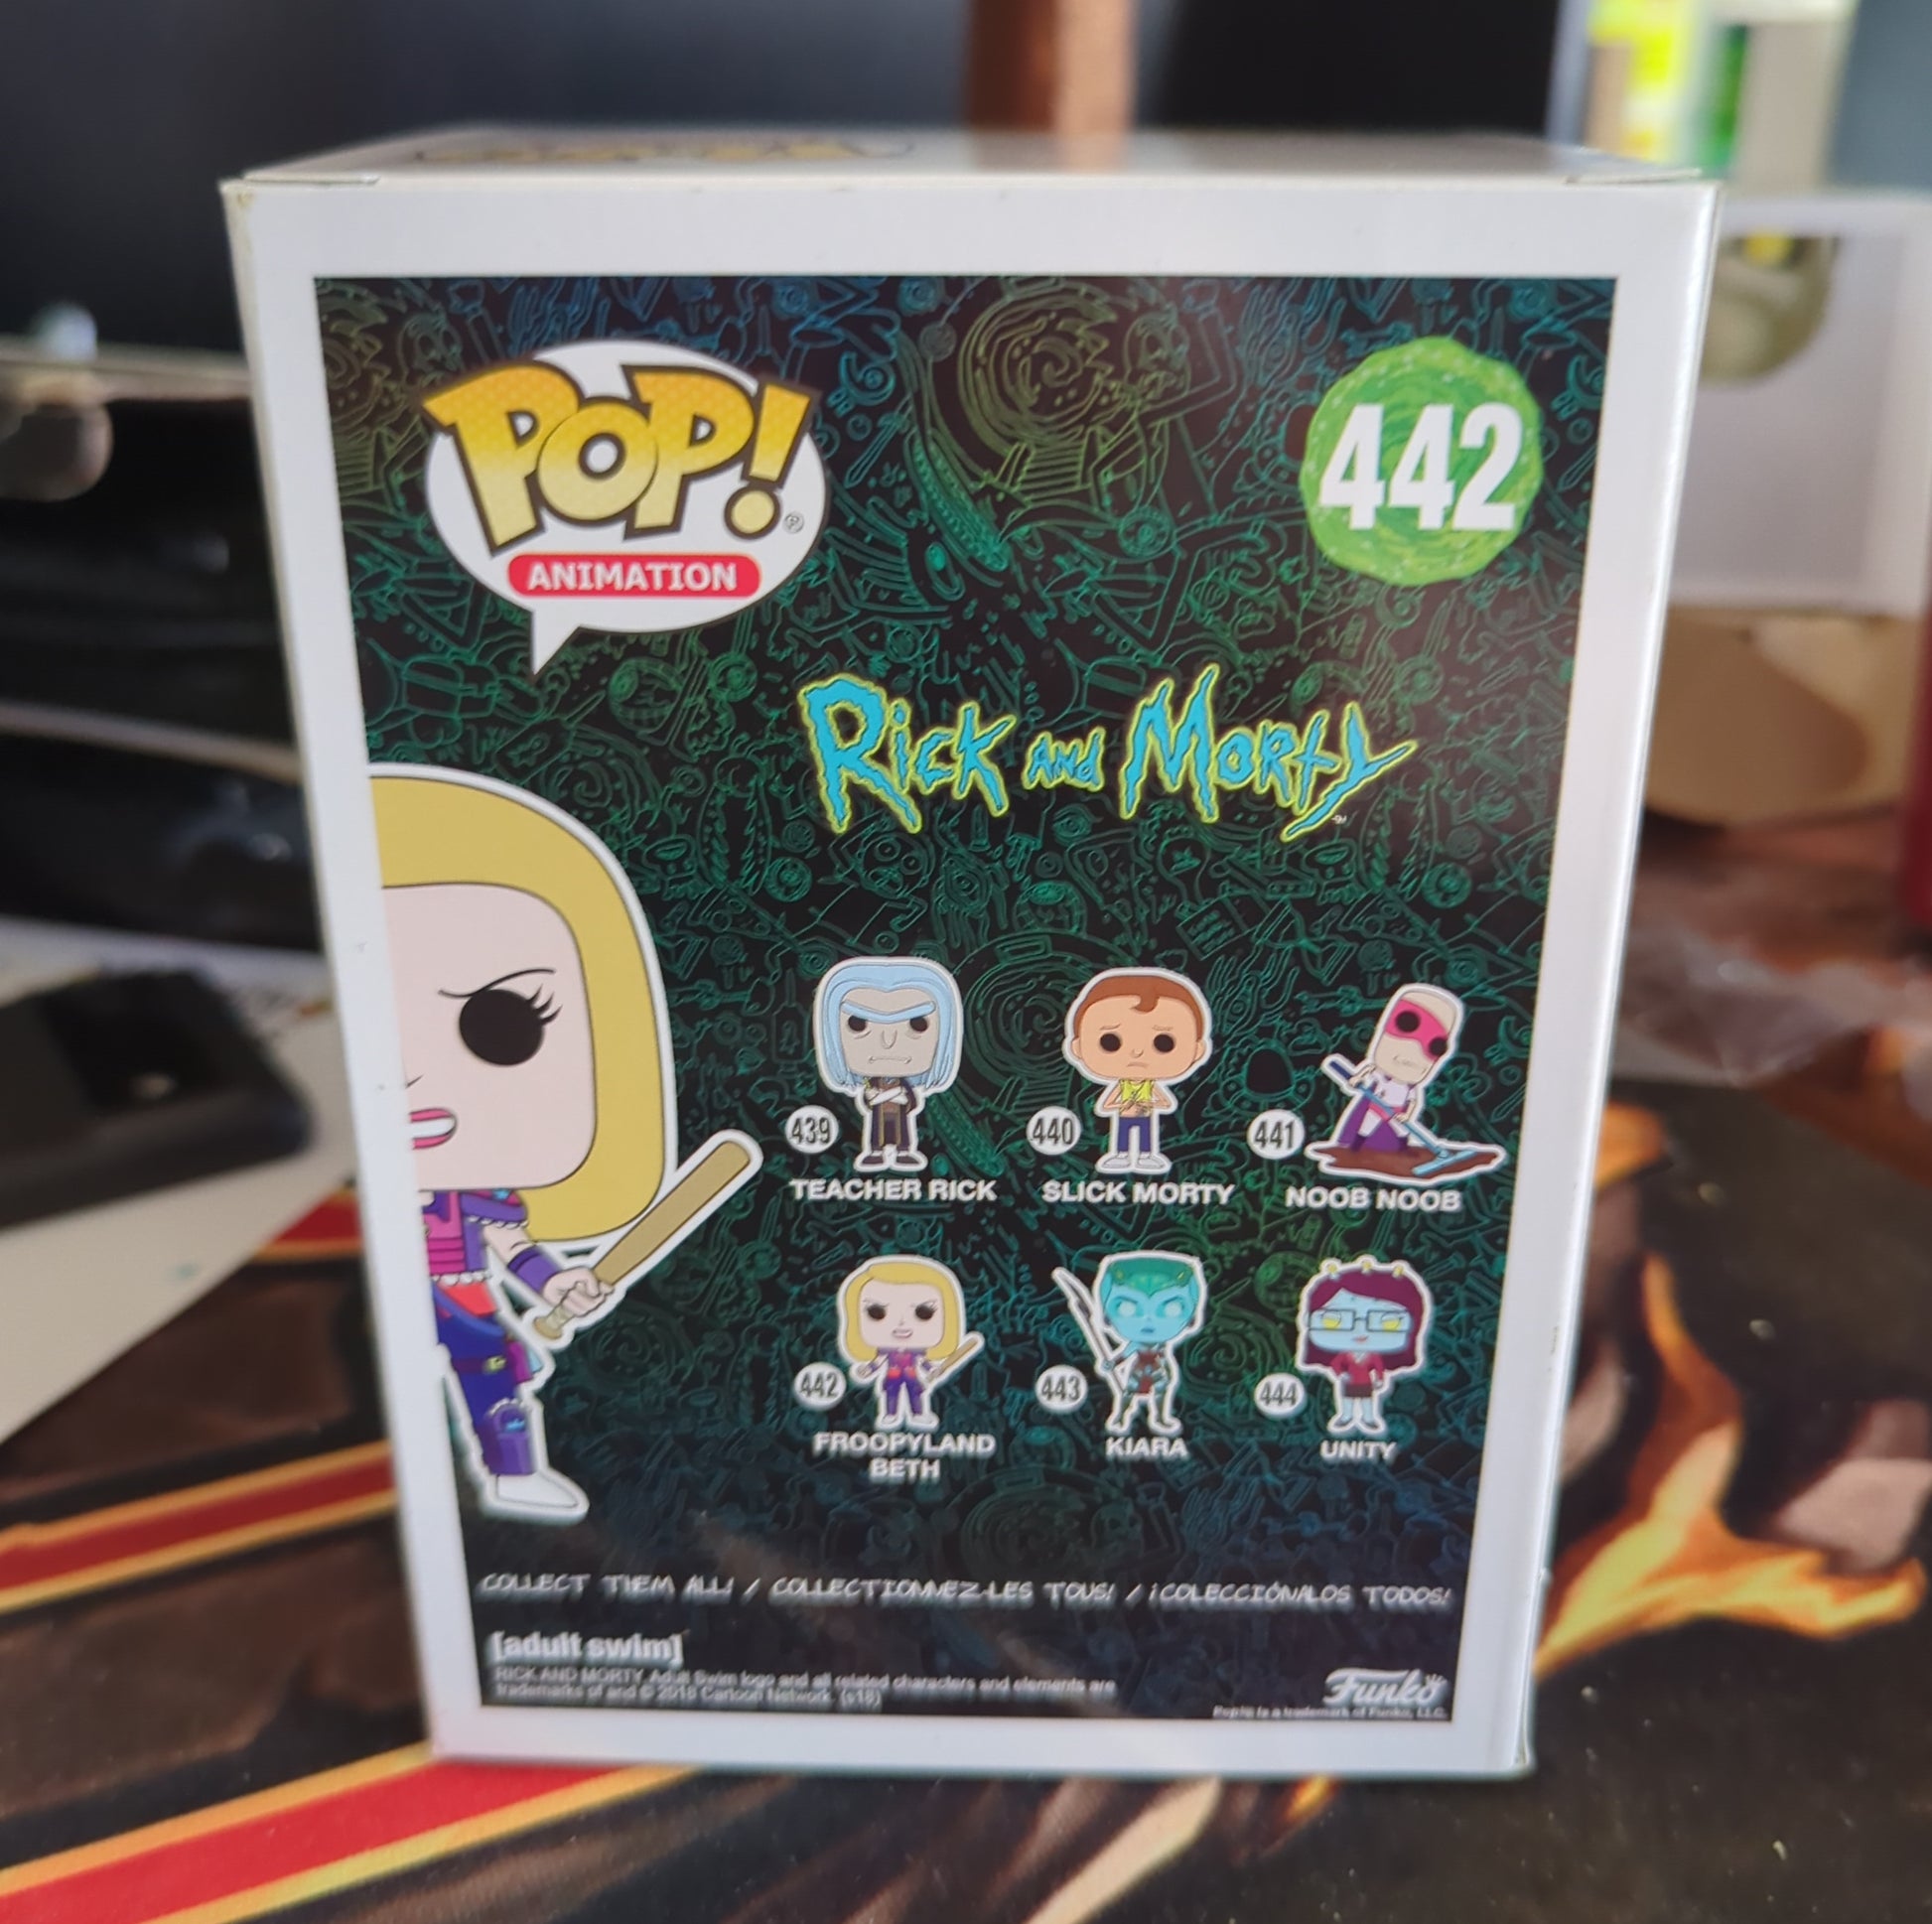 FUNKO POP VINYL - FROOPYLAND BETH - 442 - Rick and Morty FRENLY BRICKS - Open 7 Days